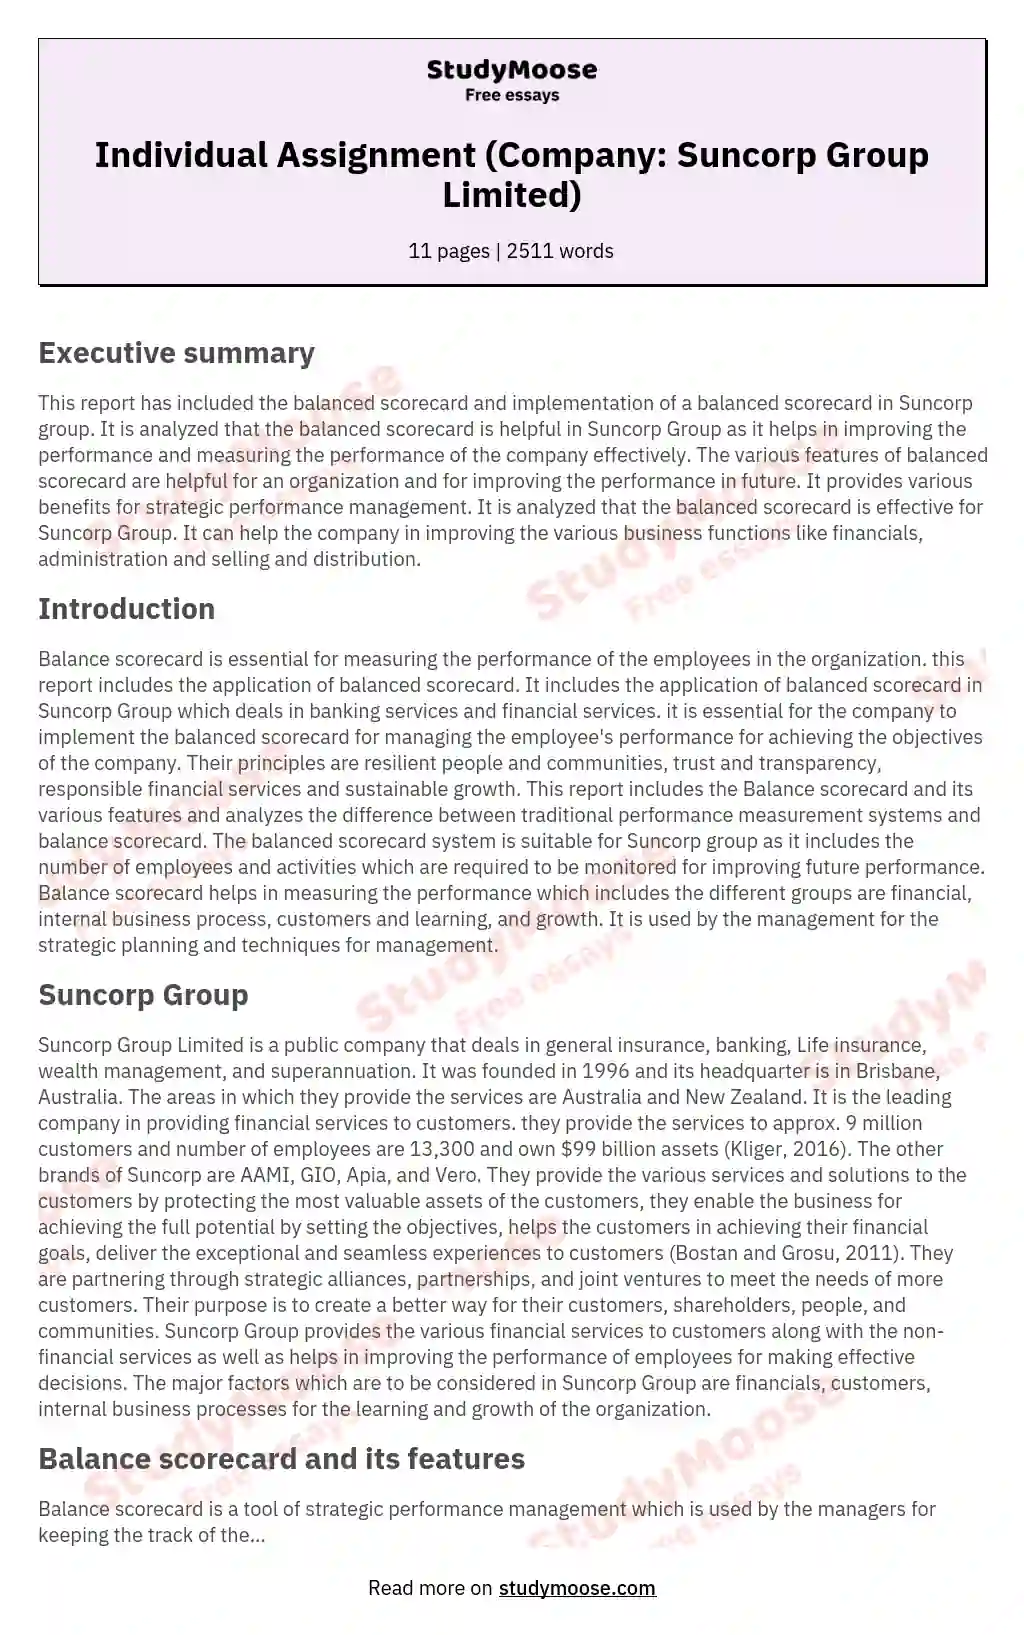 Individual Assignment (Company: Suncorp Group Limited) essay